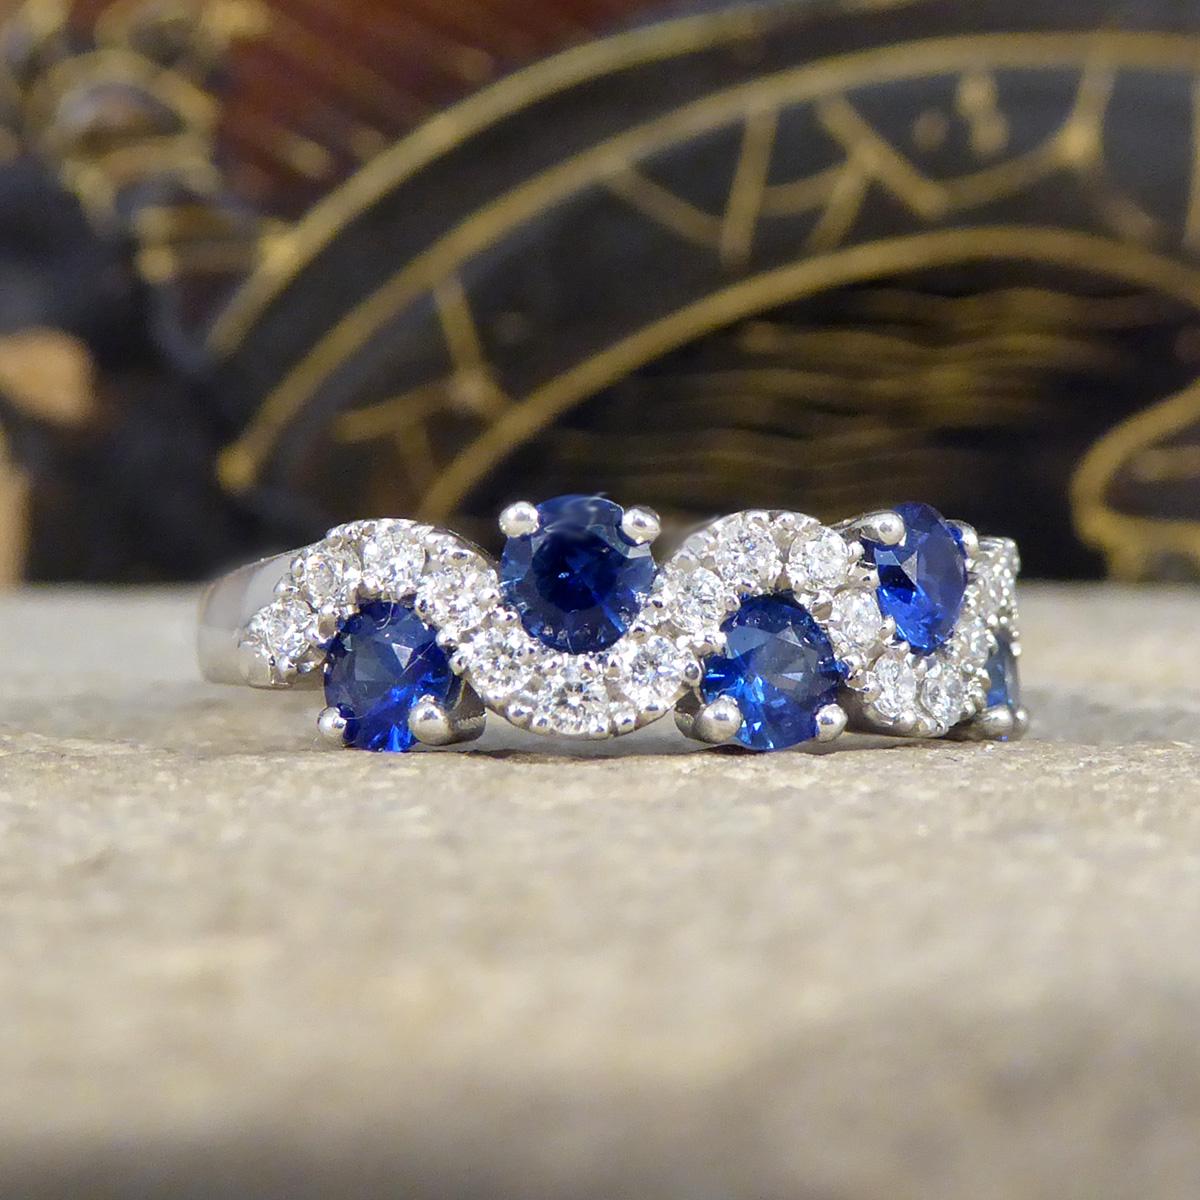 Embark on a journey of elegance with our Sapphire and Diamond 'Lazy River' ring, masterfully crafted in luxurious platinum. This exquisite piece captures the essence of serenity and grace, featuring five mesmerising Ceylon sapphires, renowned for